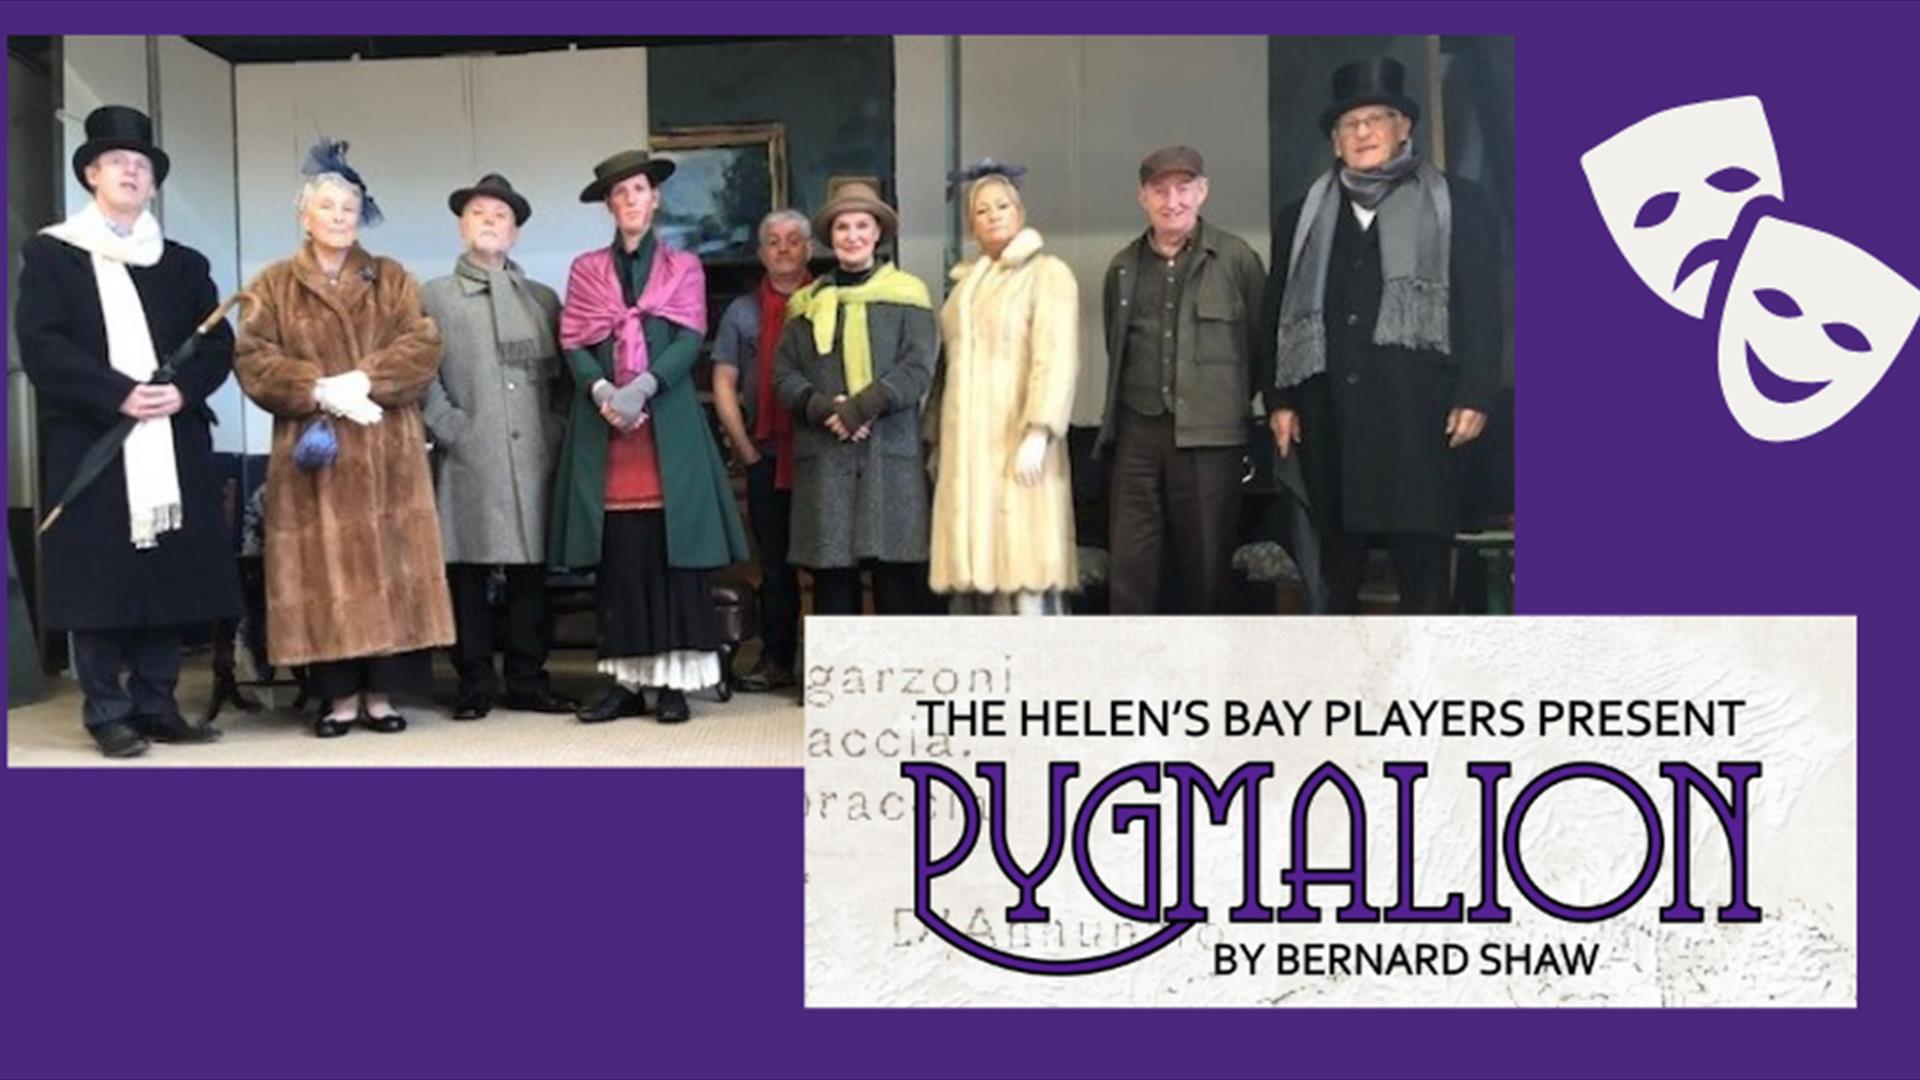 The cast of Pygmalion, Helen's Bay Players